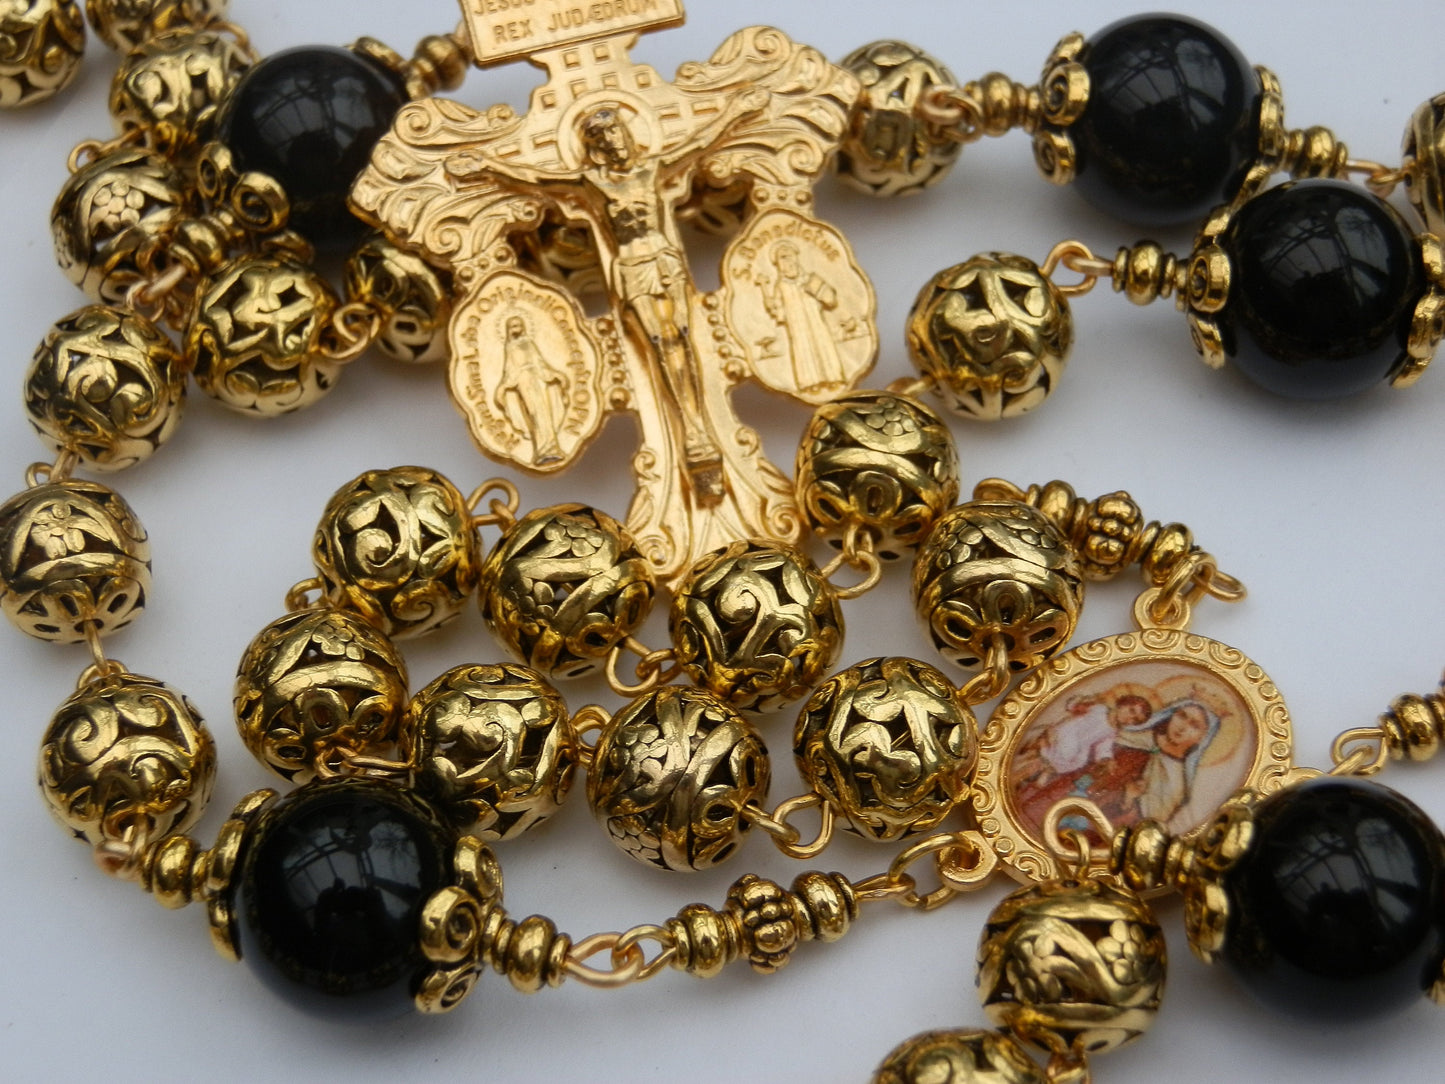 Stunning Large Heirloom Our Lady of Perpetual Help Rosary beads, Onyx Rosaries gems, Gold plated Bali Rosary beads,  Wedding Rosary gift.